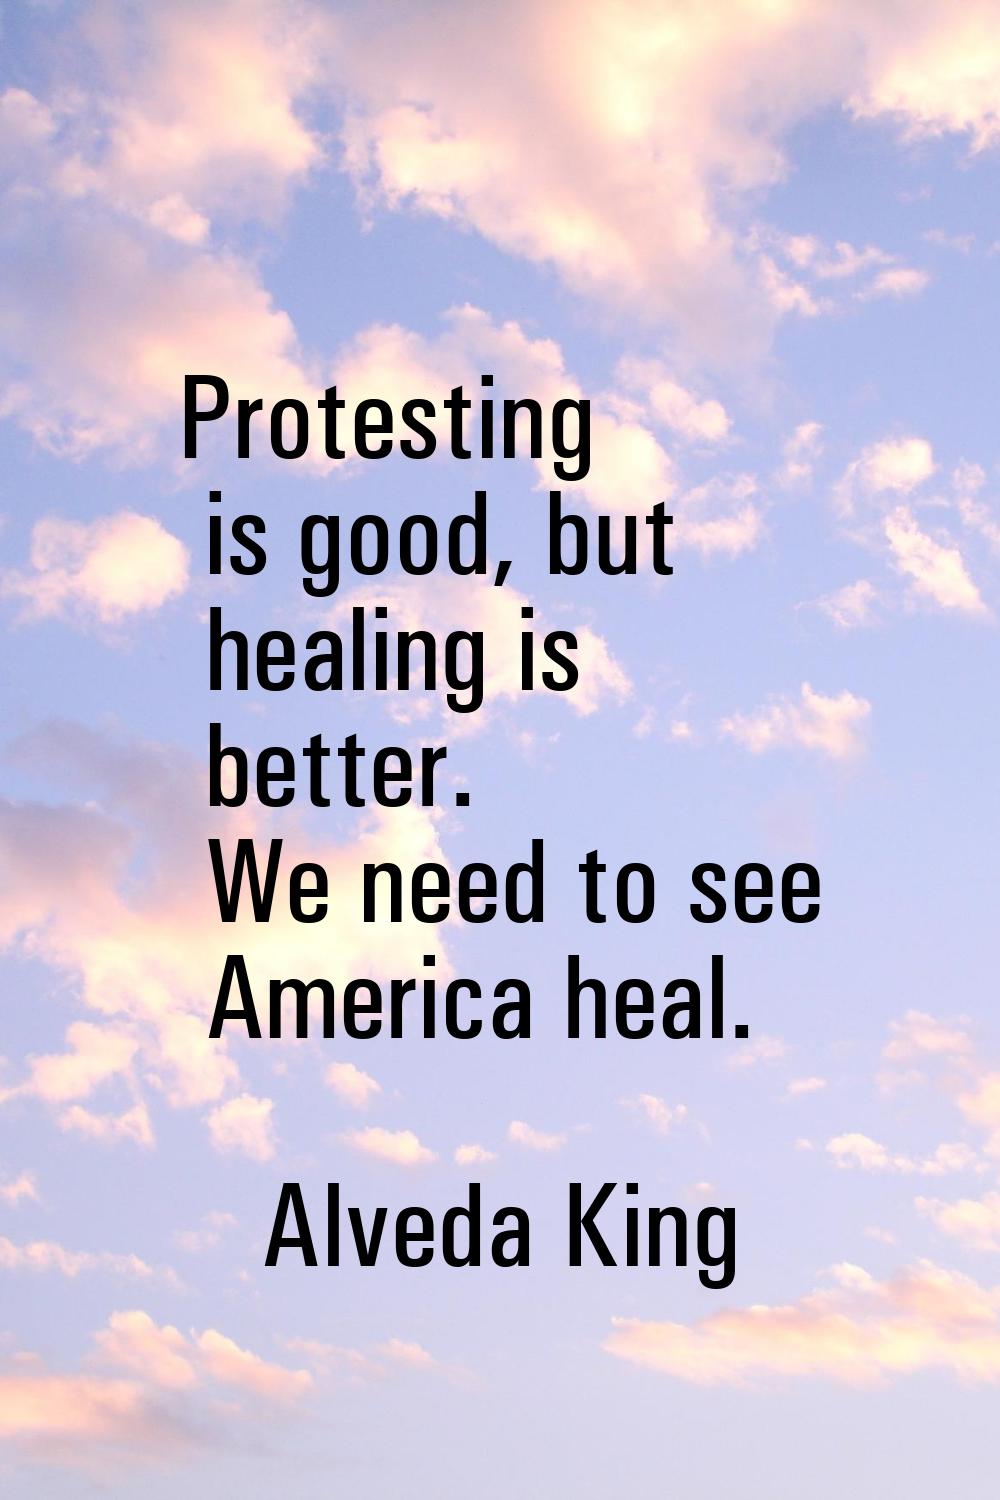 Protesting is good, but healing is better. We need to see America heal.